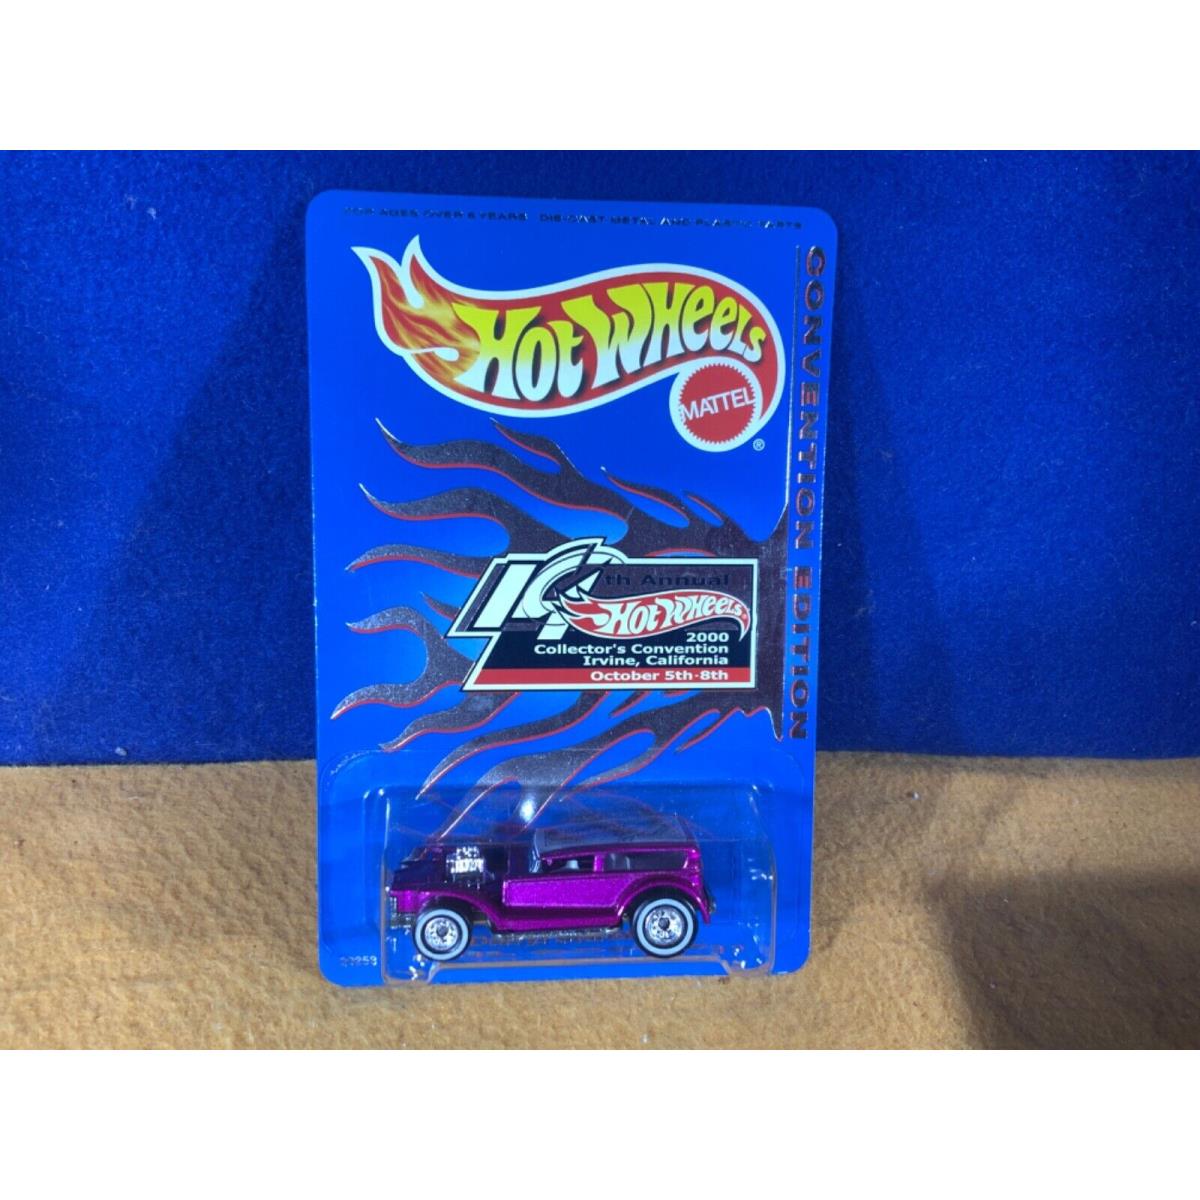 O9-52 Hot Wheels 11th Collectors Convention - Lil Coffin / Darryl Starbird -2000